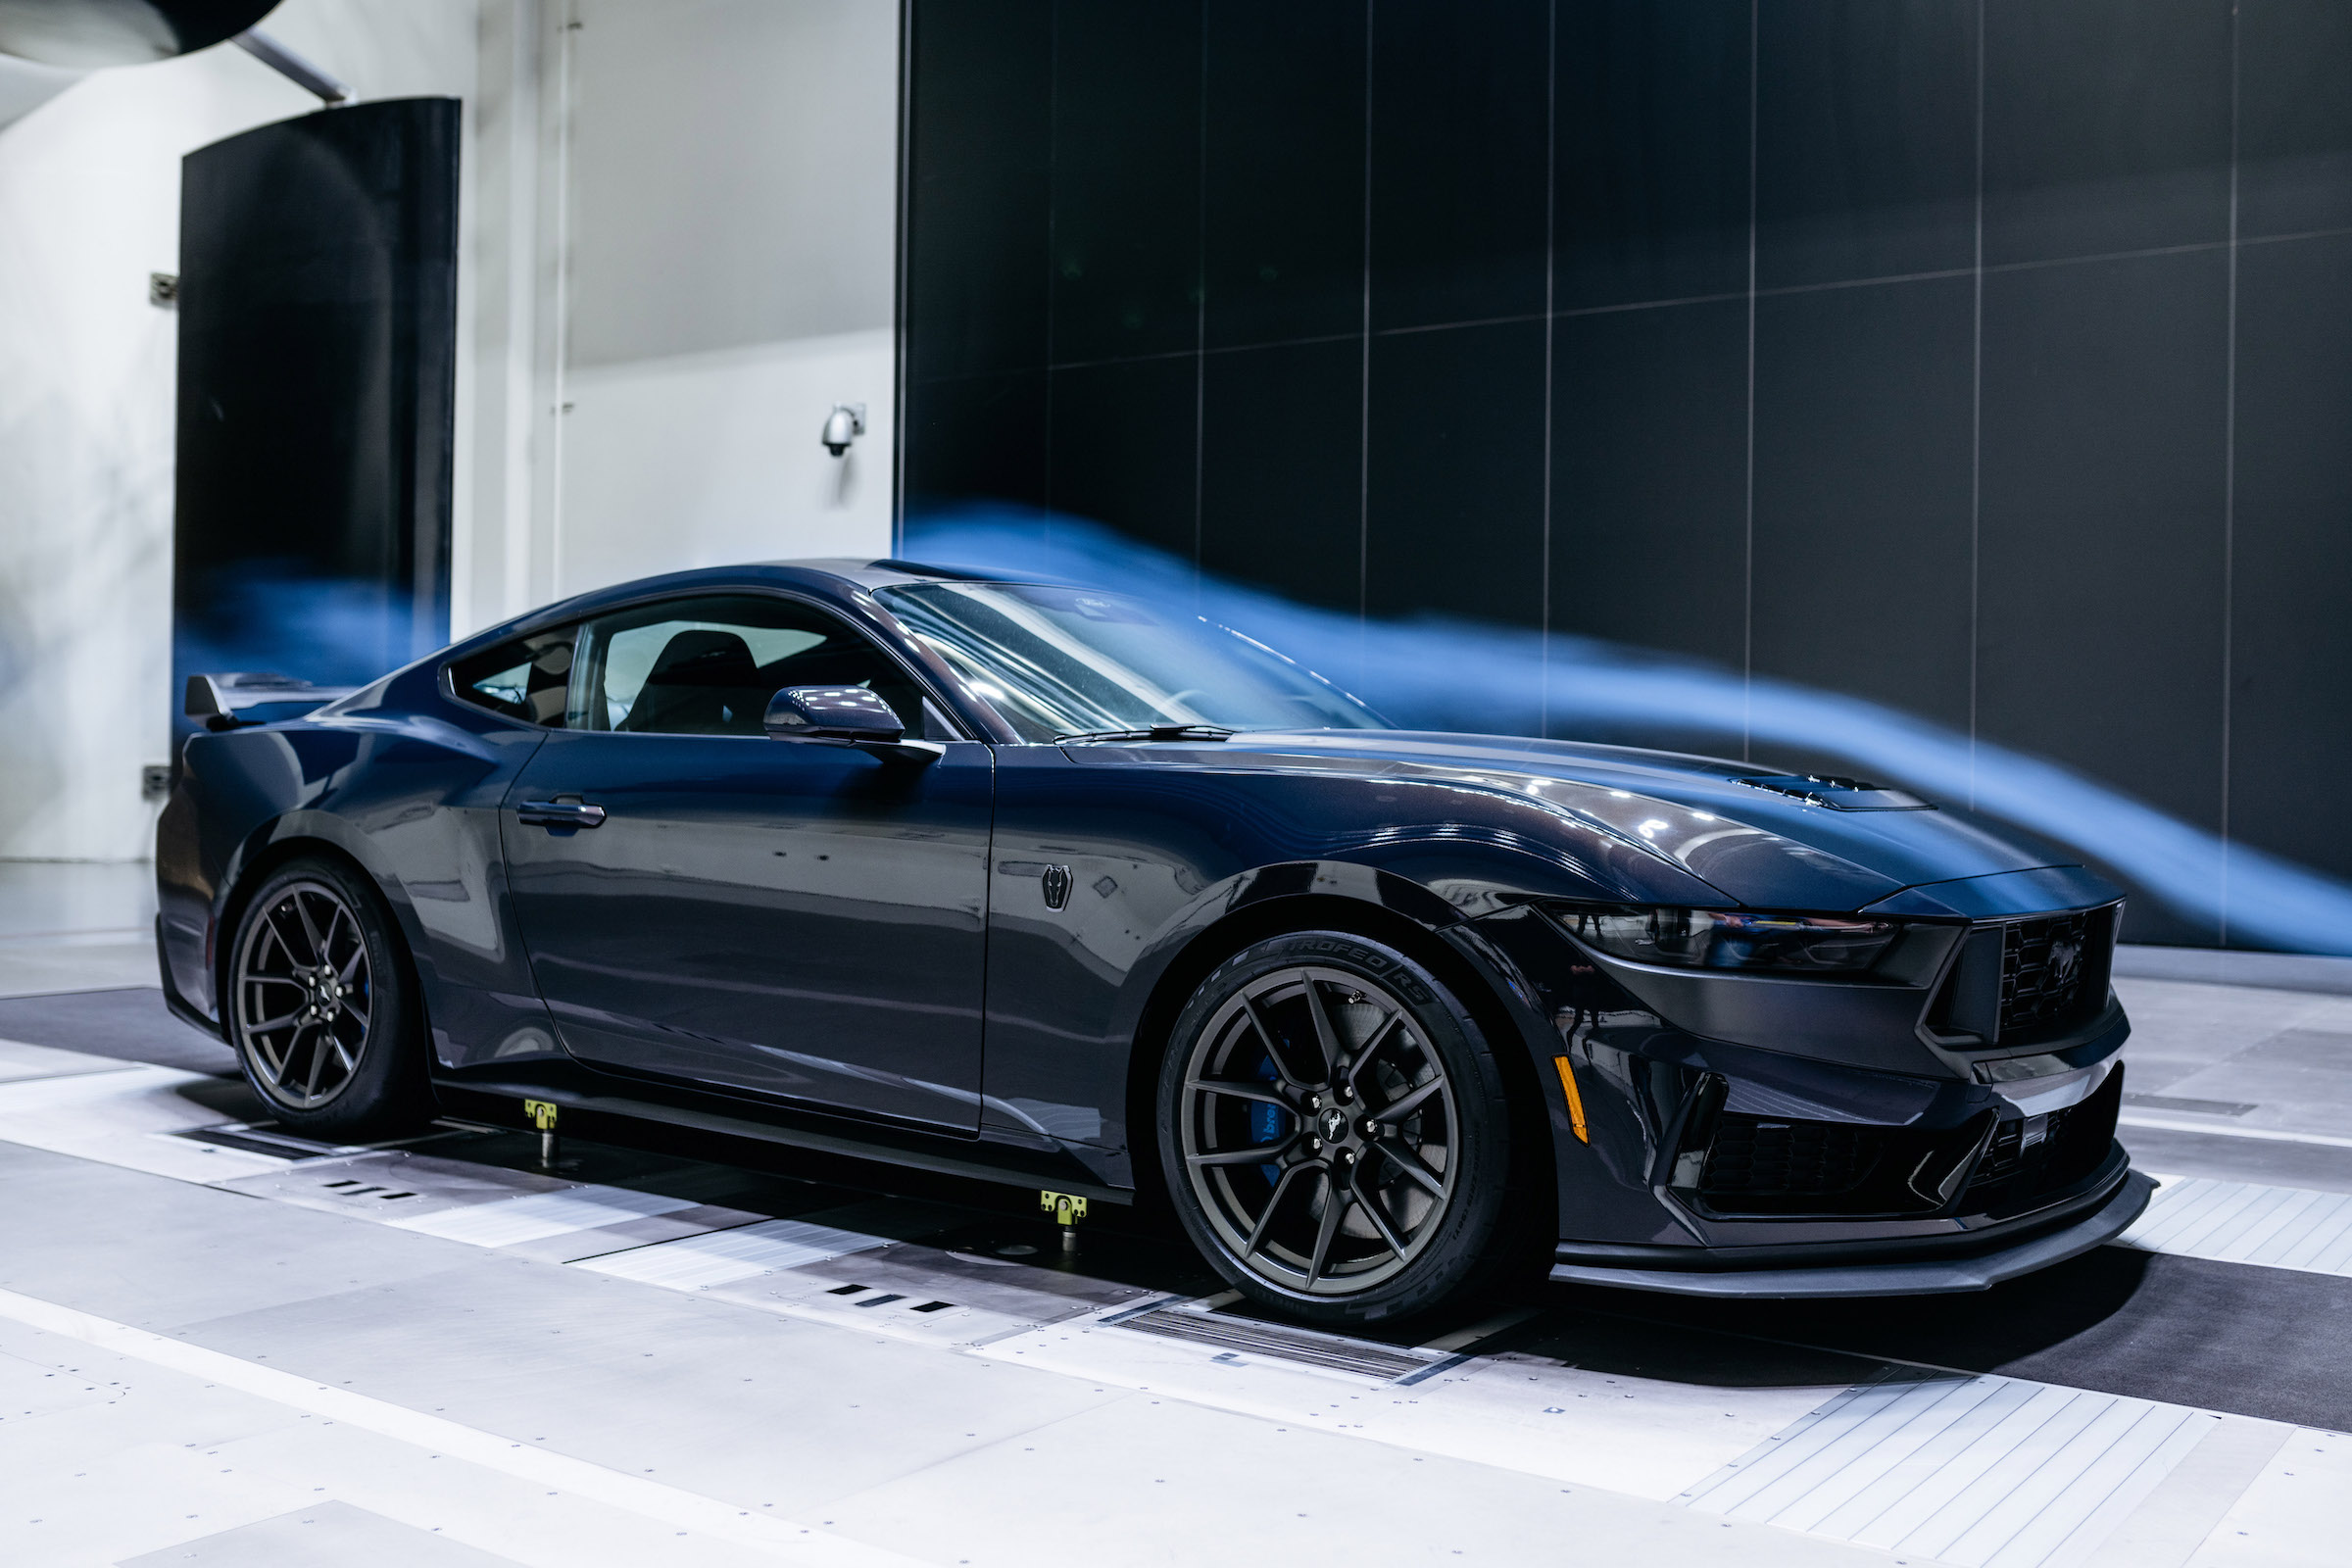 S650 Mustang Mustang Dark Horse Was Shaped by Ford's New Cutting Edge 200 MPH Wind Tunnel Rolling Road Wind Tunnel_Mustang Dark Horse_05